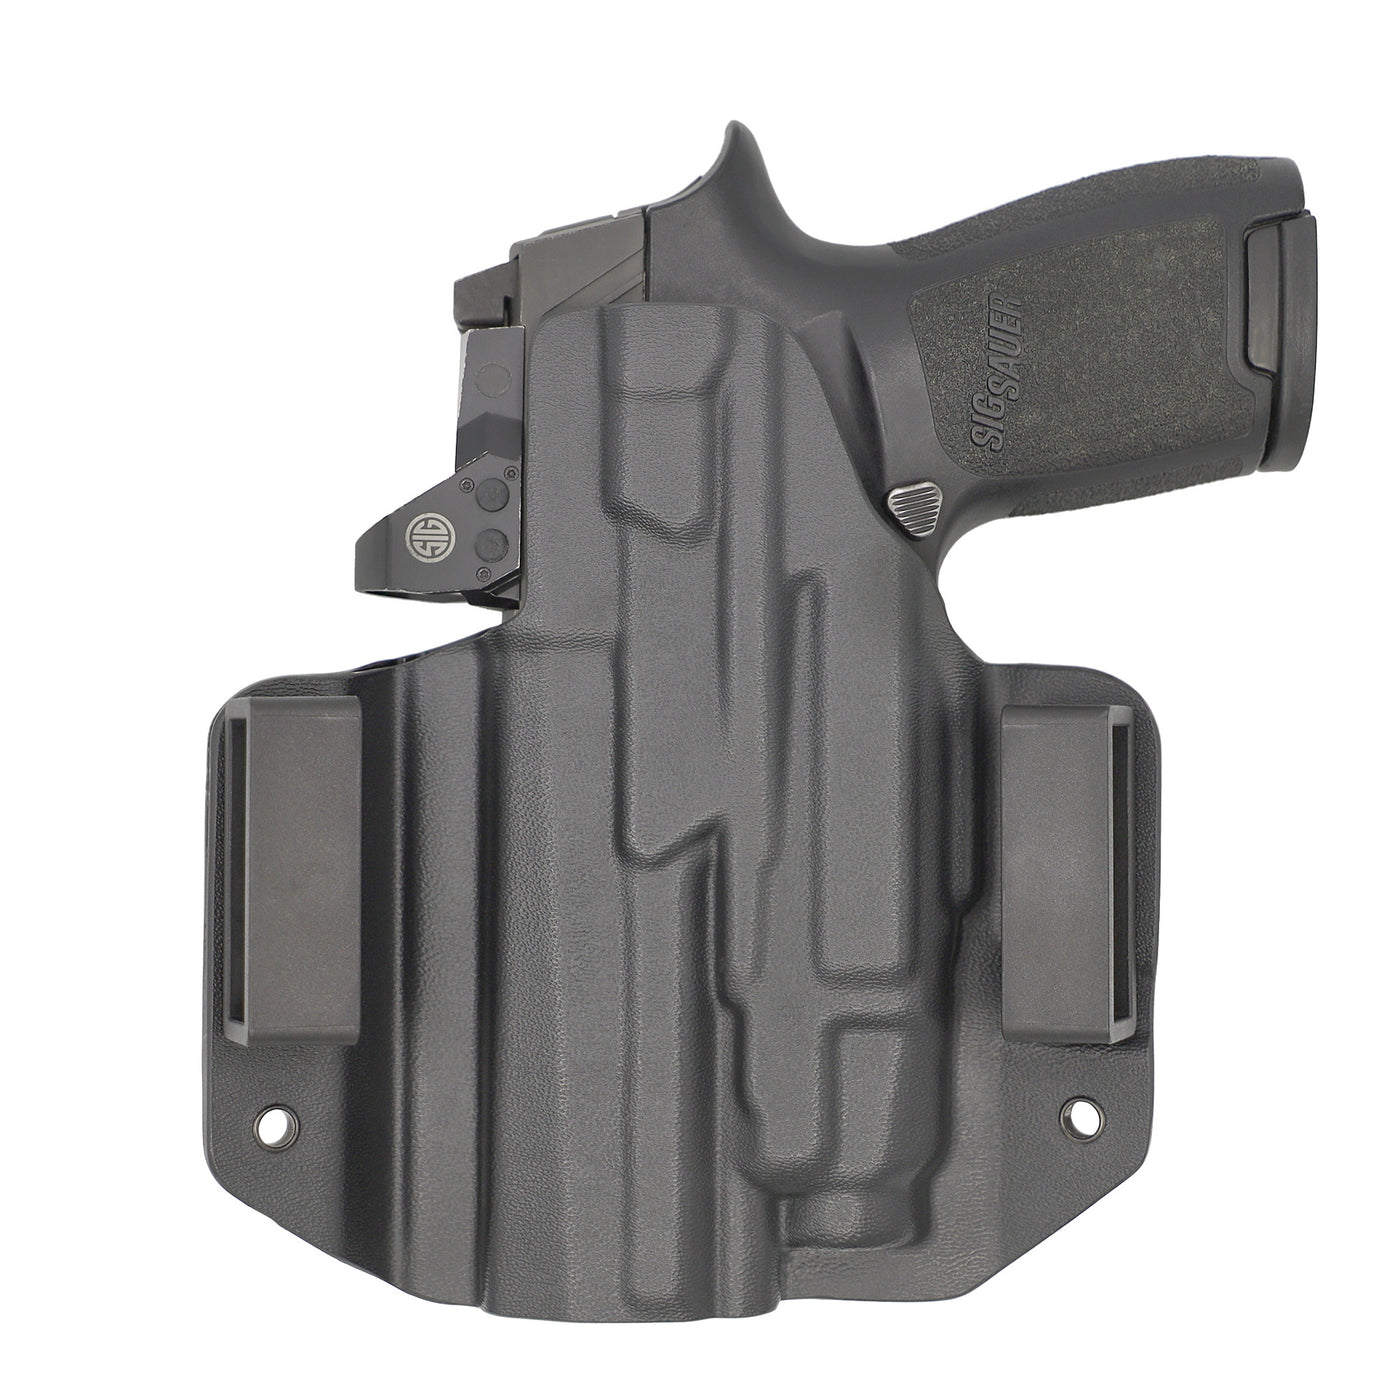 C&G Holsters quickship OWB Tactical Masada Streamlight tlr7/a in holstered position back view